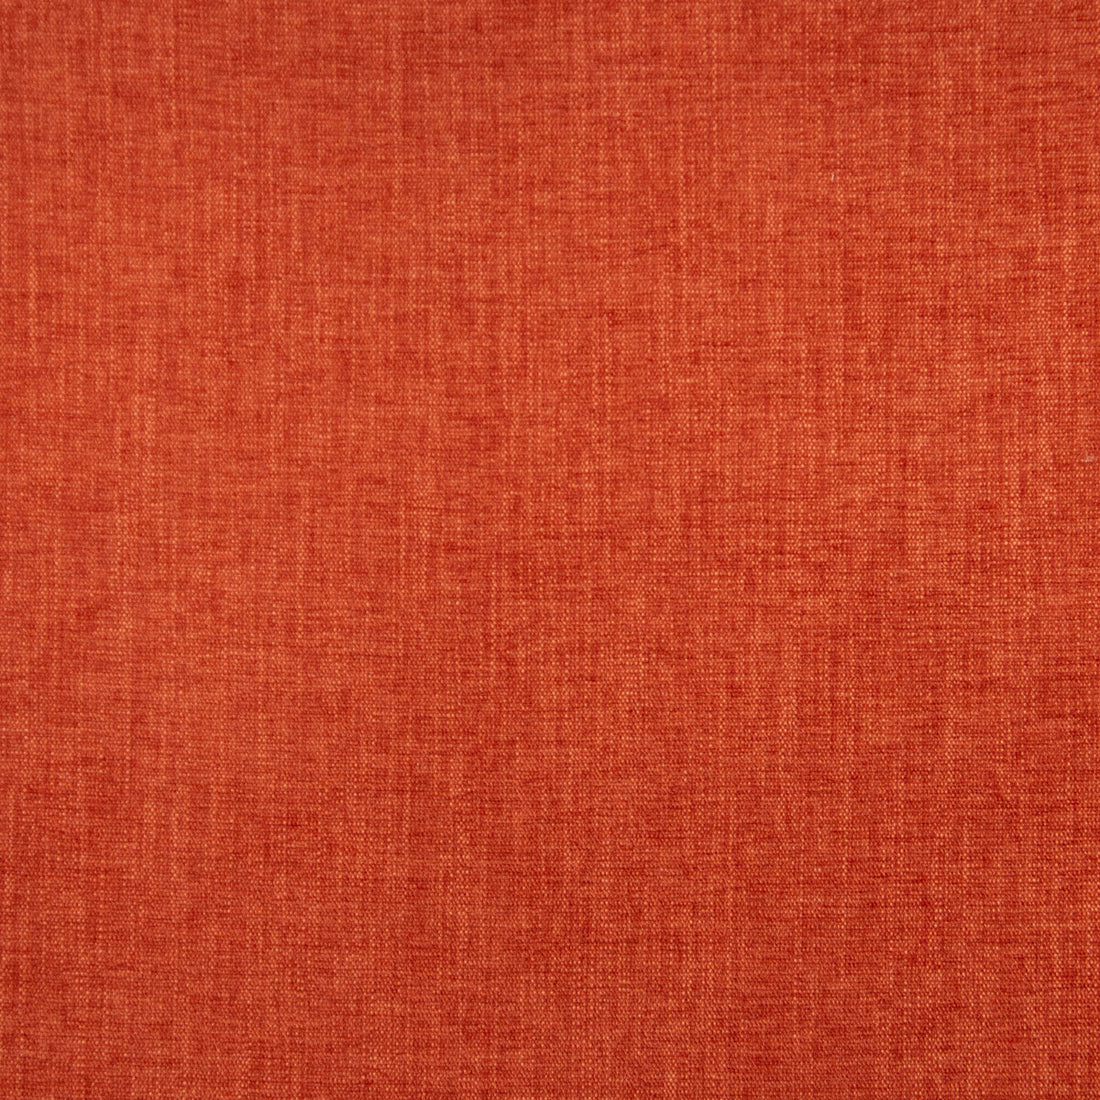 Moro fabric in naranja color - pattern GDT5670.022.0 - by Gaston y Daniela in the Gaston Maiorica collection